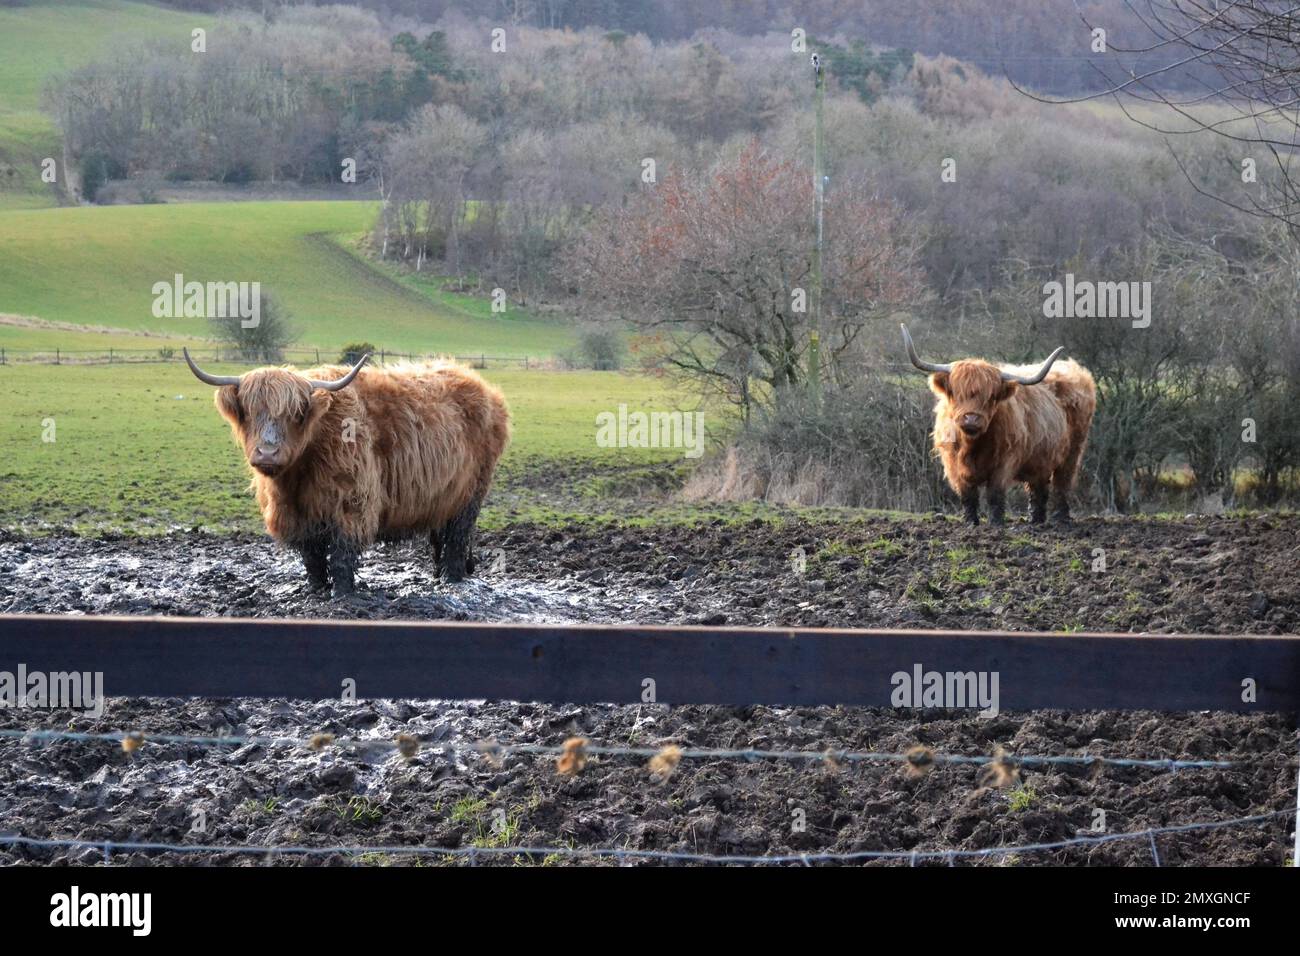 Highland Cattle Standing In A Muddy Farmers Field - Hairy Cow - Long Hair - Strong Horns - Bos Taurus Bovidae Family - Yorkshire - UK Stock Photo